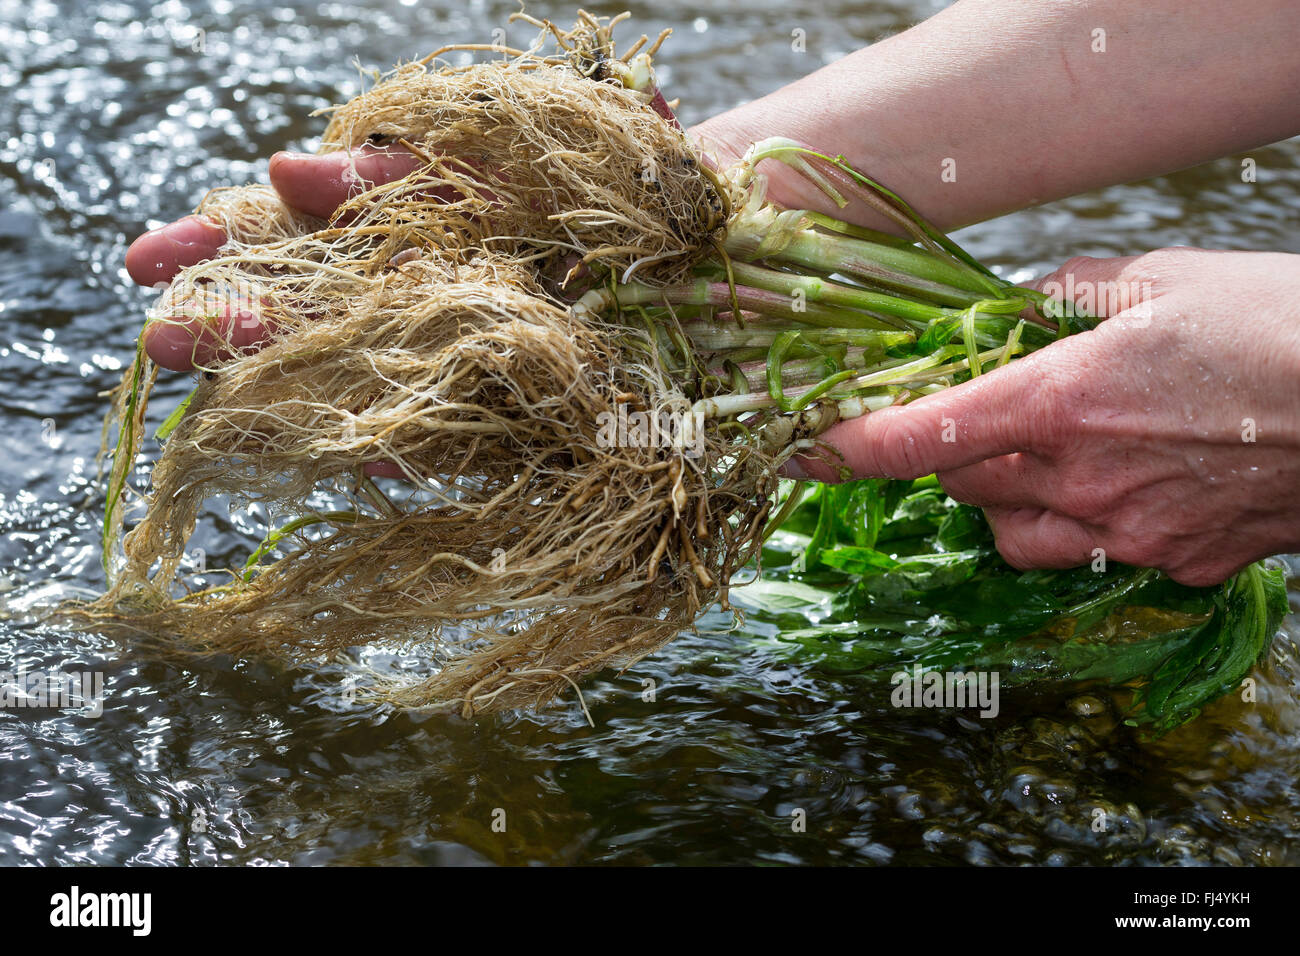 common valerian, all-heal, garden heliotrope, garden valerian (Valeriana officinalis), valerian roots are washed in a stream, Germany Stock Photo